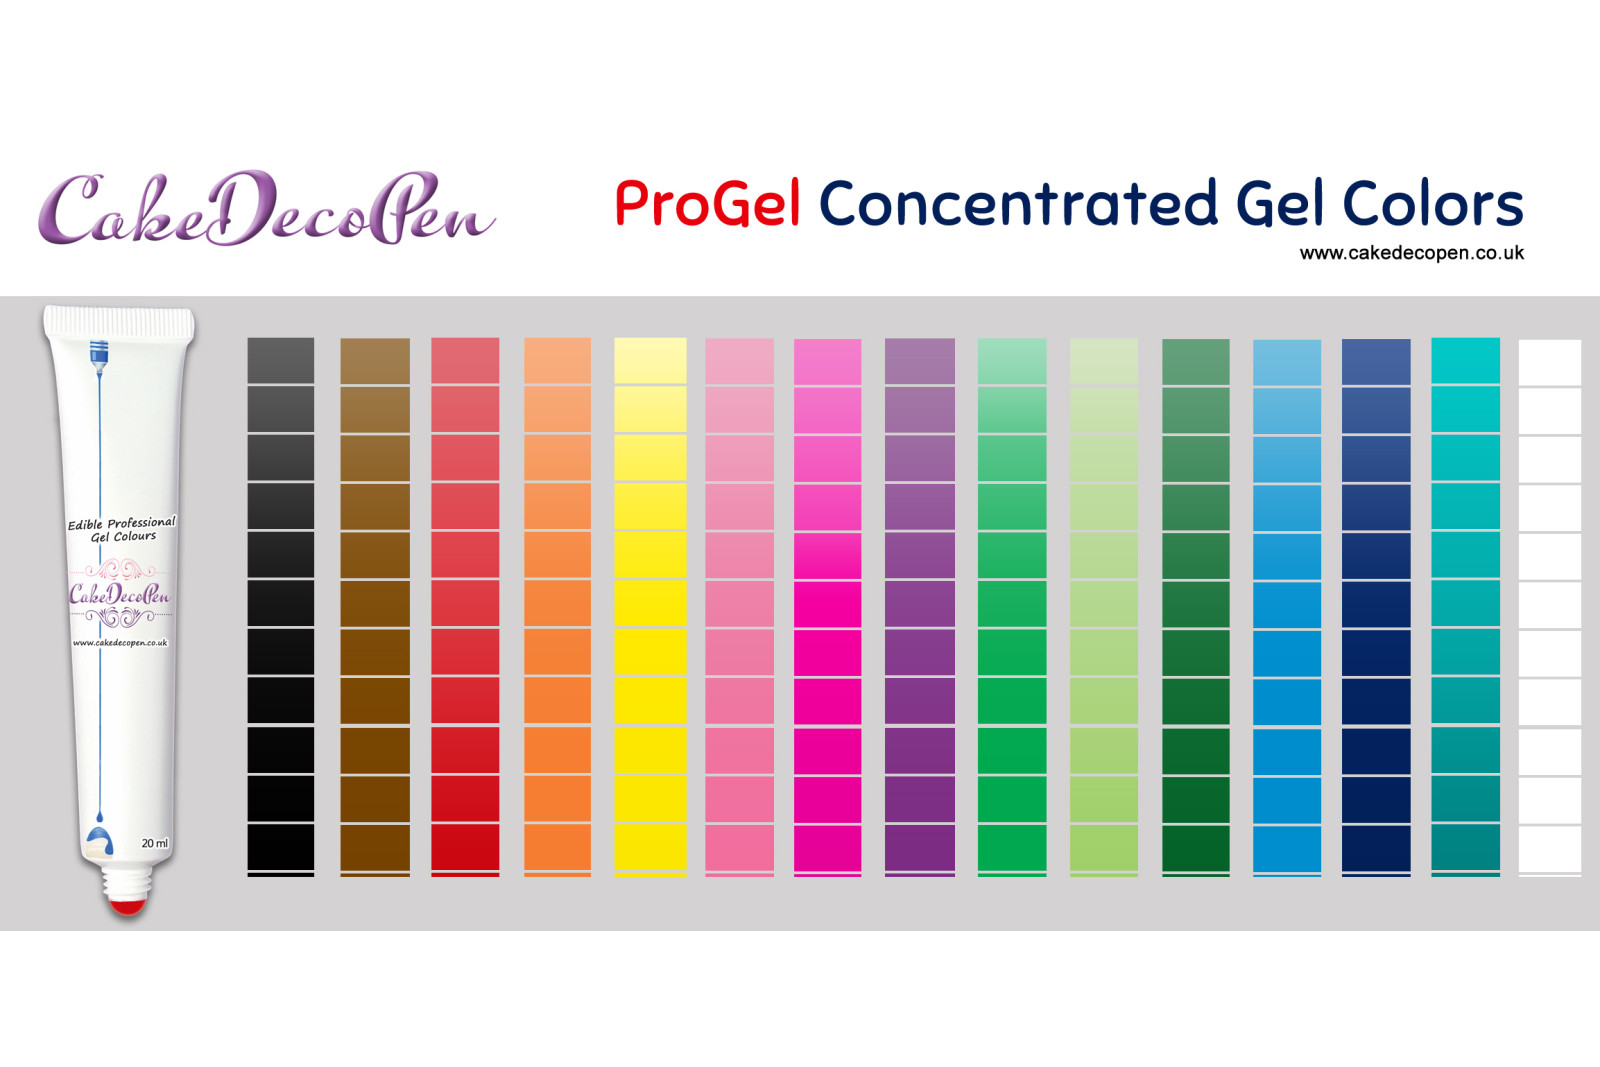 Pure Teal | Gel Food Colors | Concentrated ProGel | Cake Decorating | 30 ML